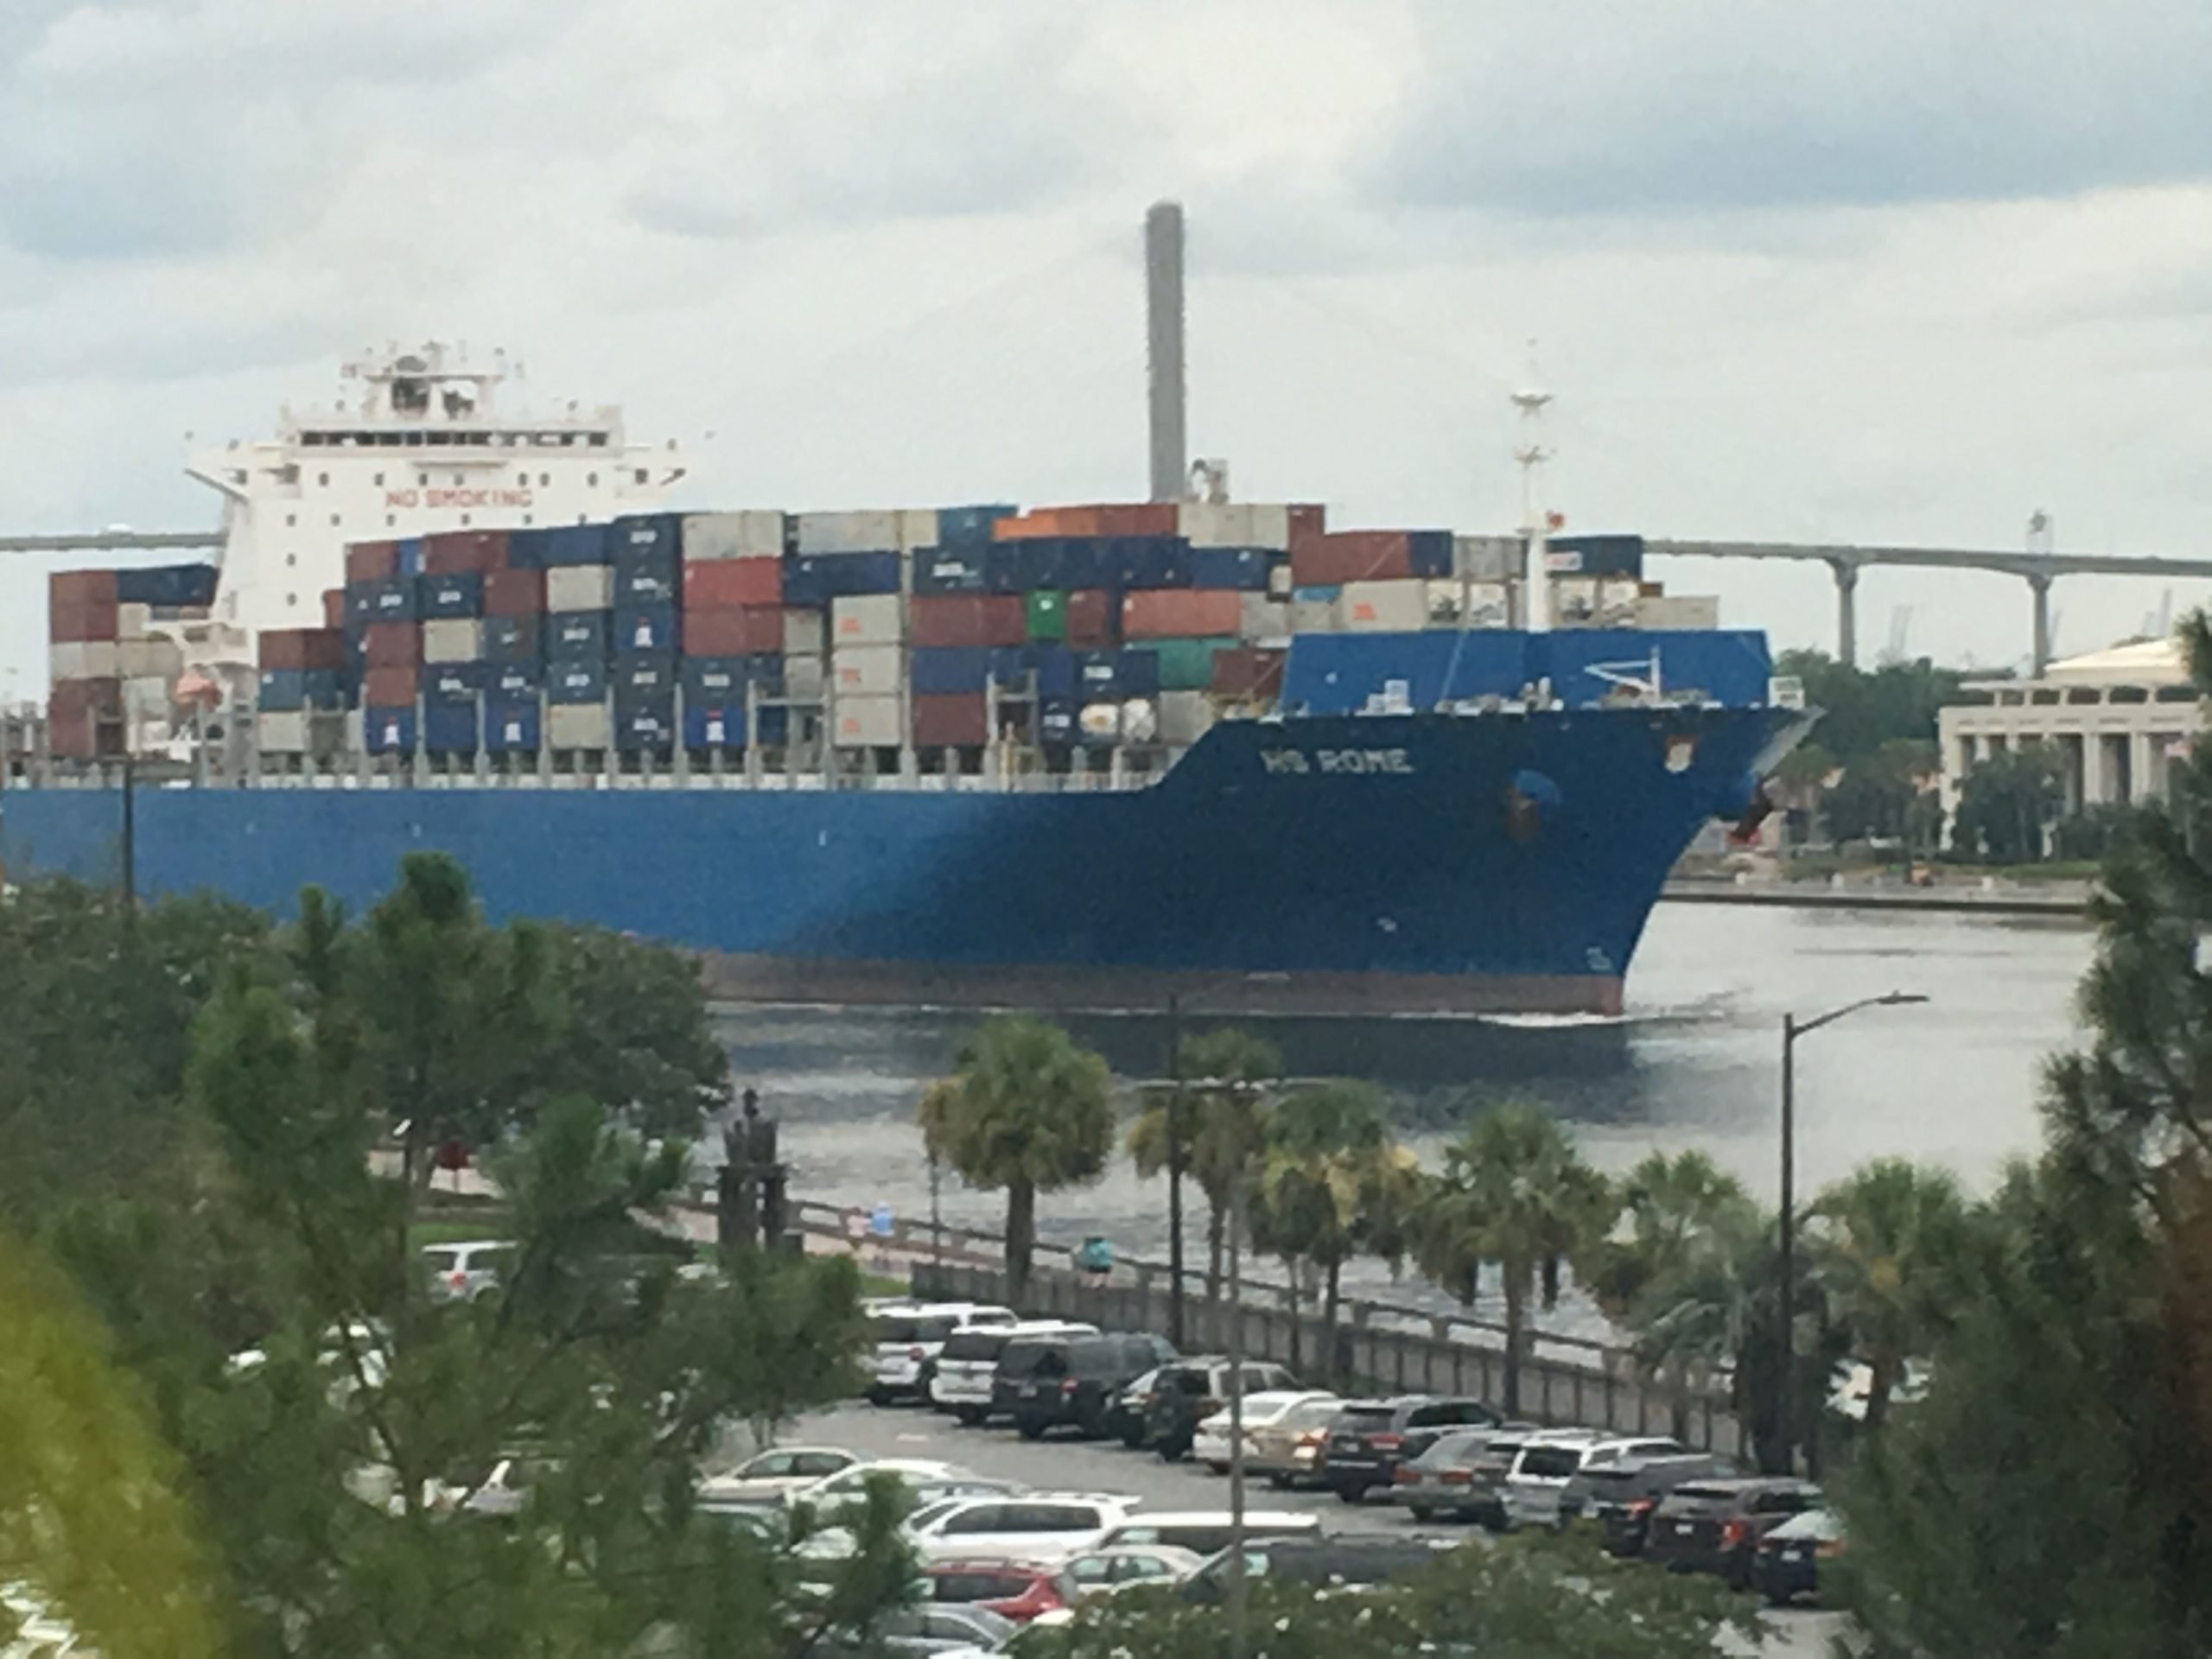 Cargo ship going out from port; SAVANNAH, GA